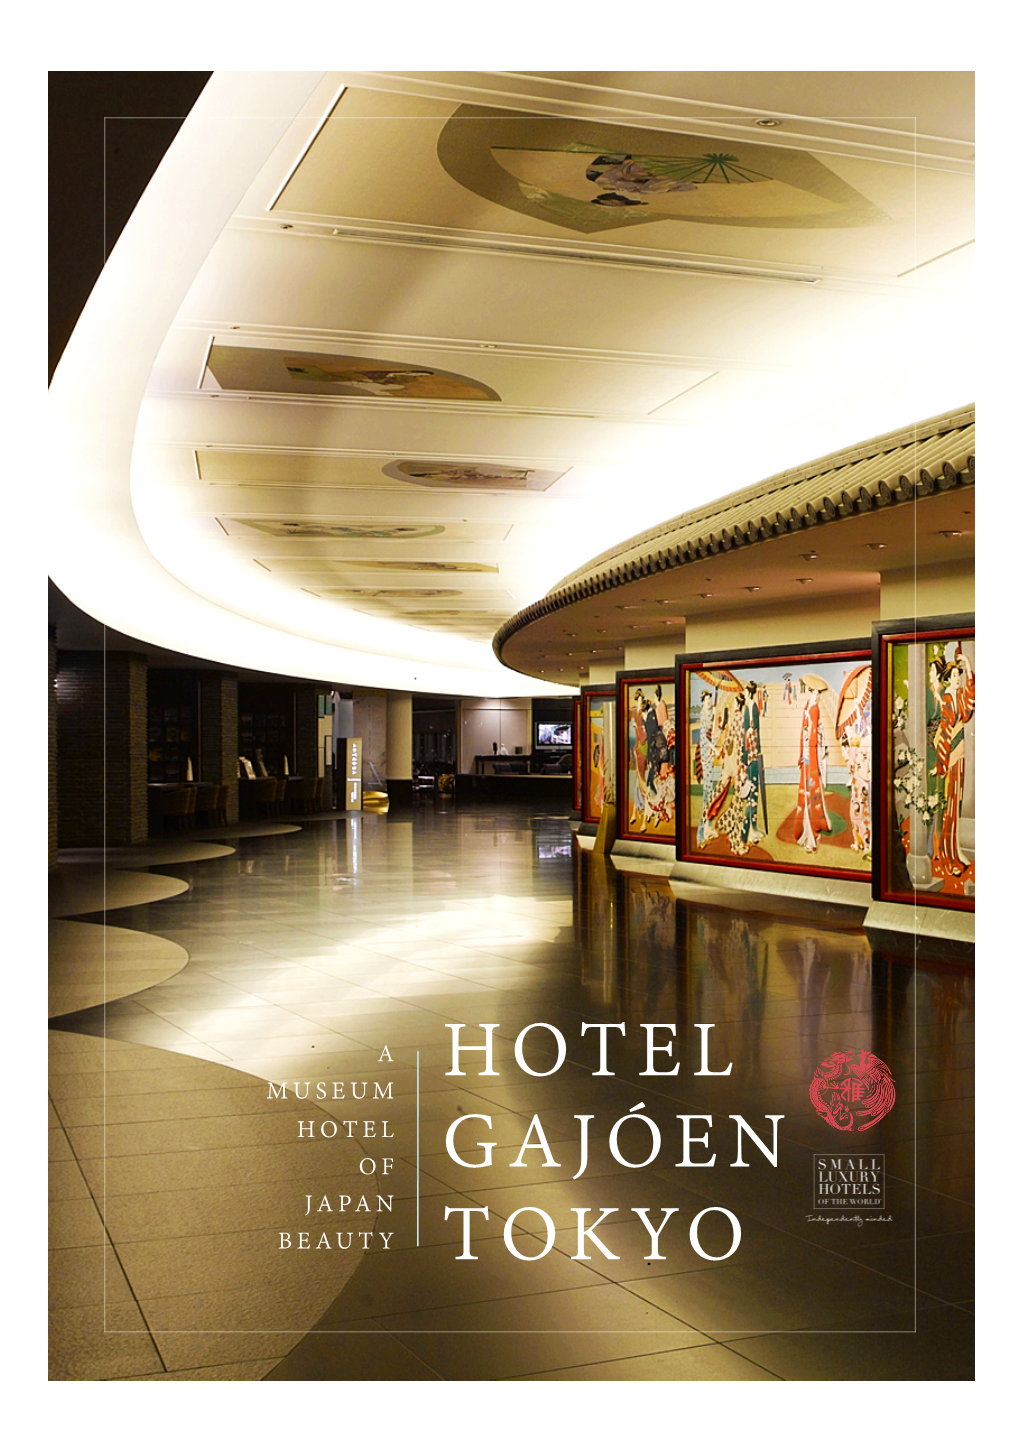 Hotel Gajóen Tokyo Is the Product of Nearly 100 Years of Pushing the Boundaries of Hospitality and Experience